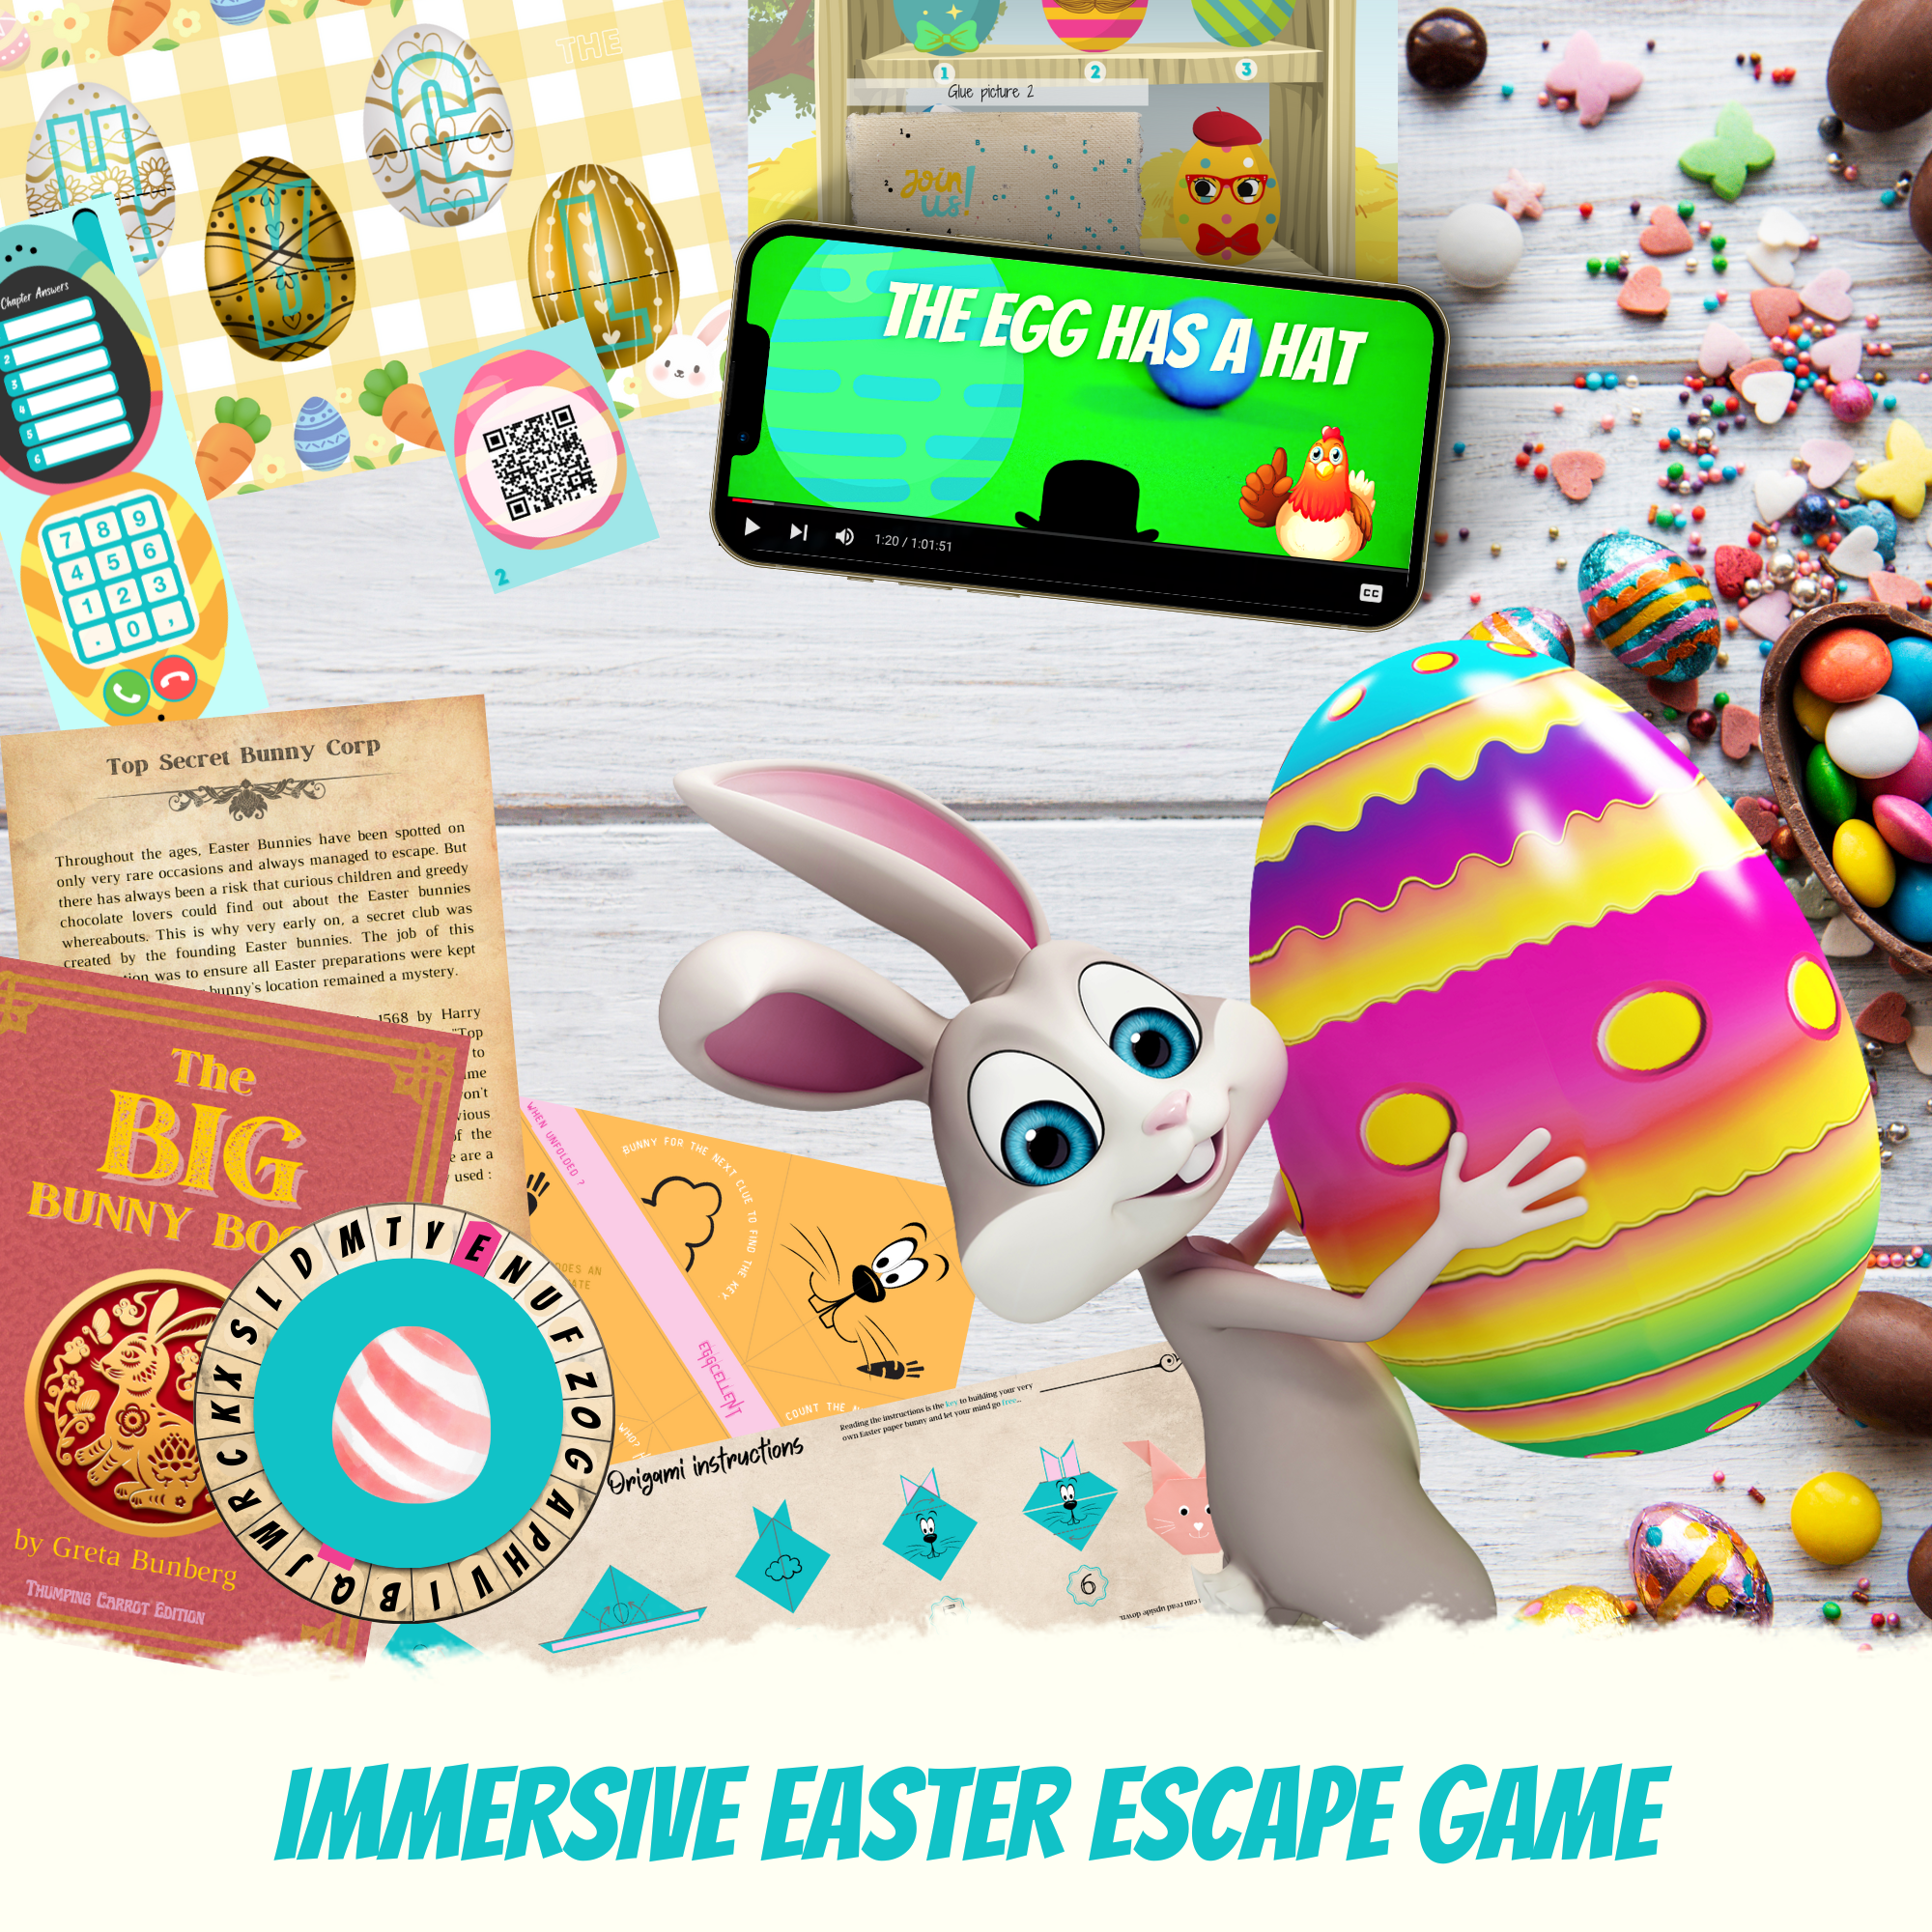 Escape Room Game kit for kids perfect for children birthday parties : Great Easter Escape. Home family easter bunny egg treasure hunt  activity -  mobile phone shot